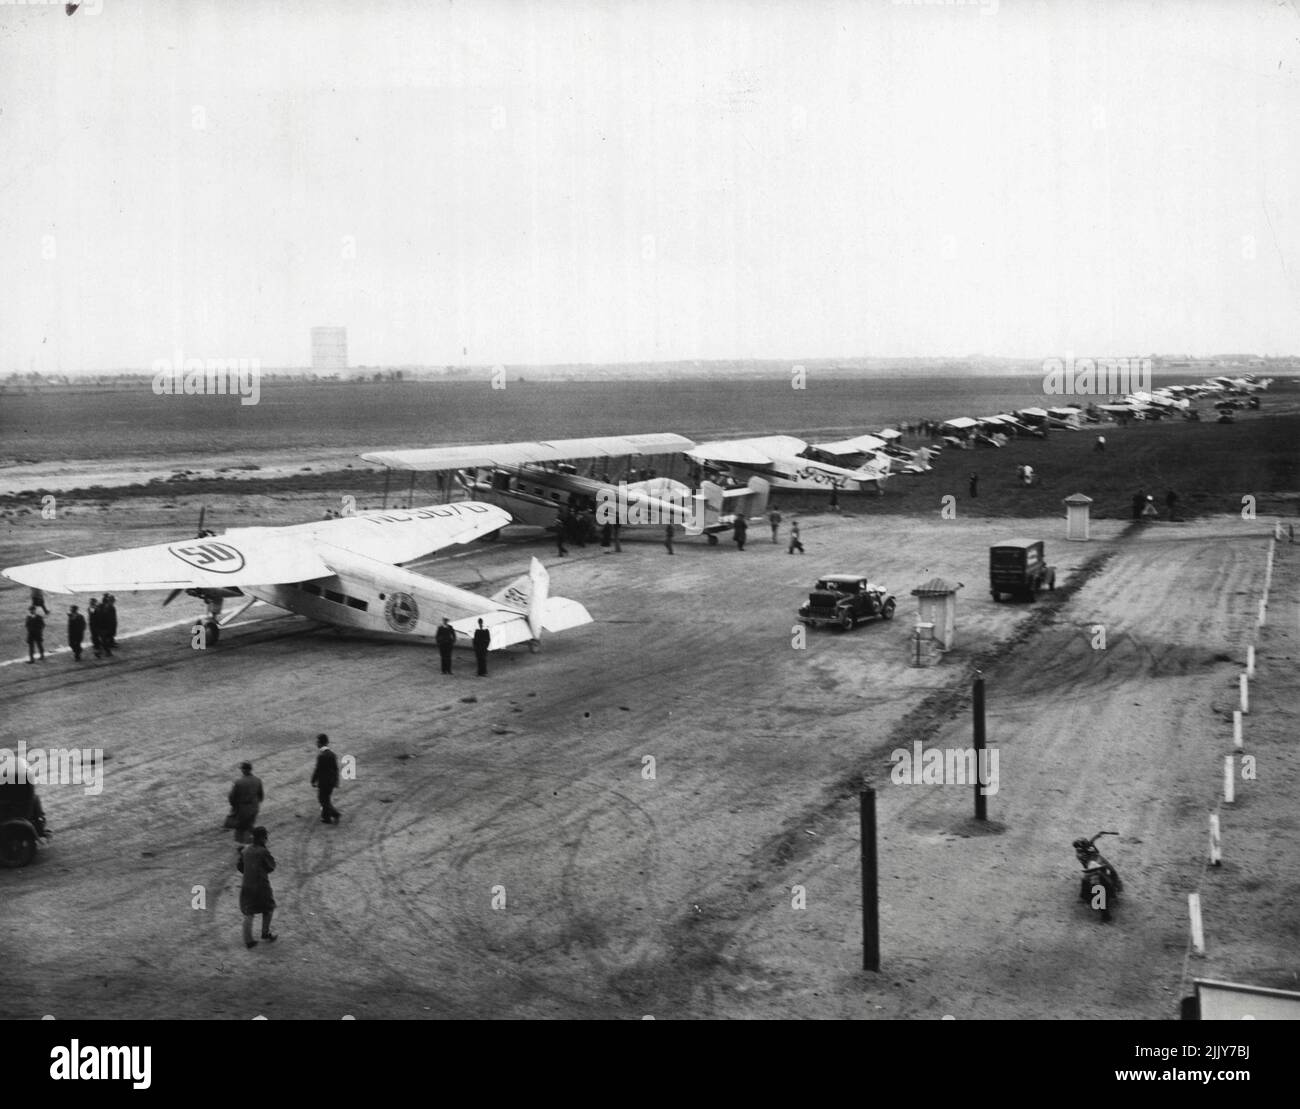 Planes In 1929 National Air Tour Arrive At Roosevelt Field A few of